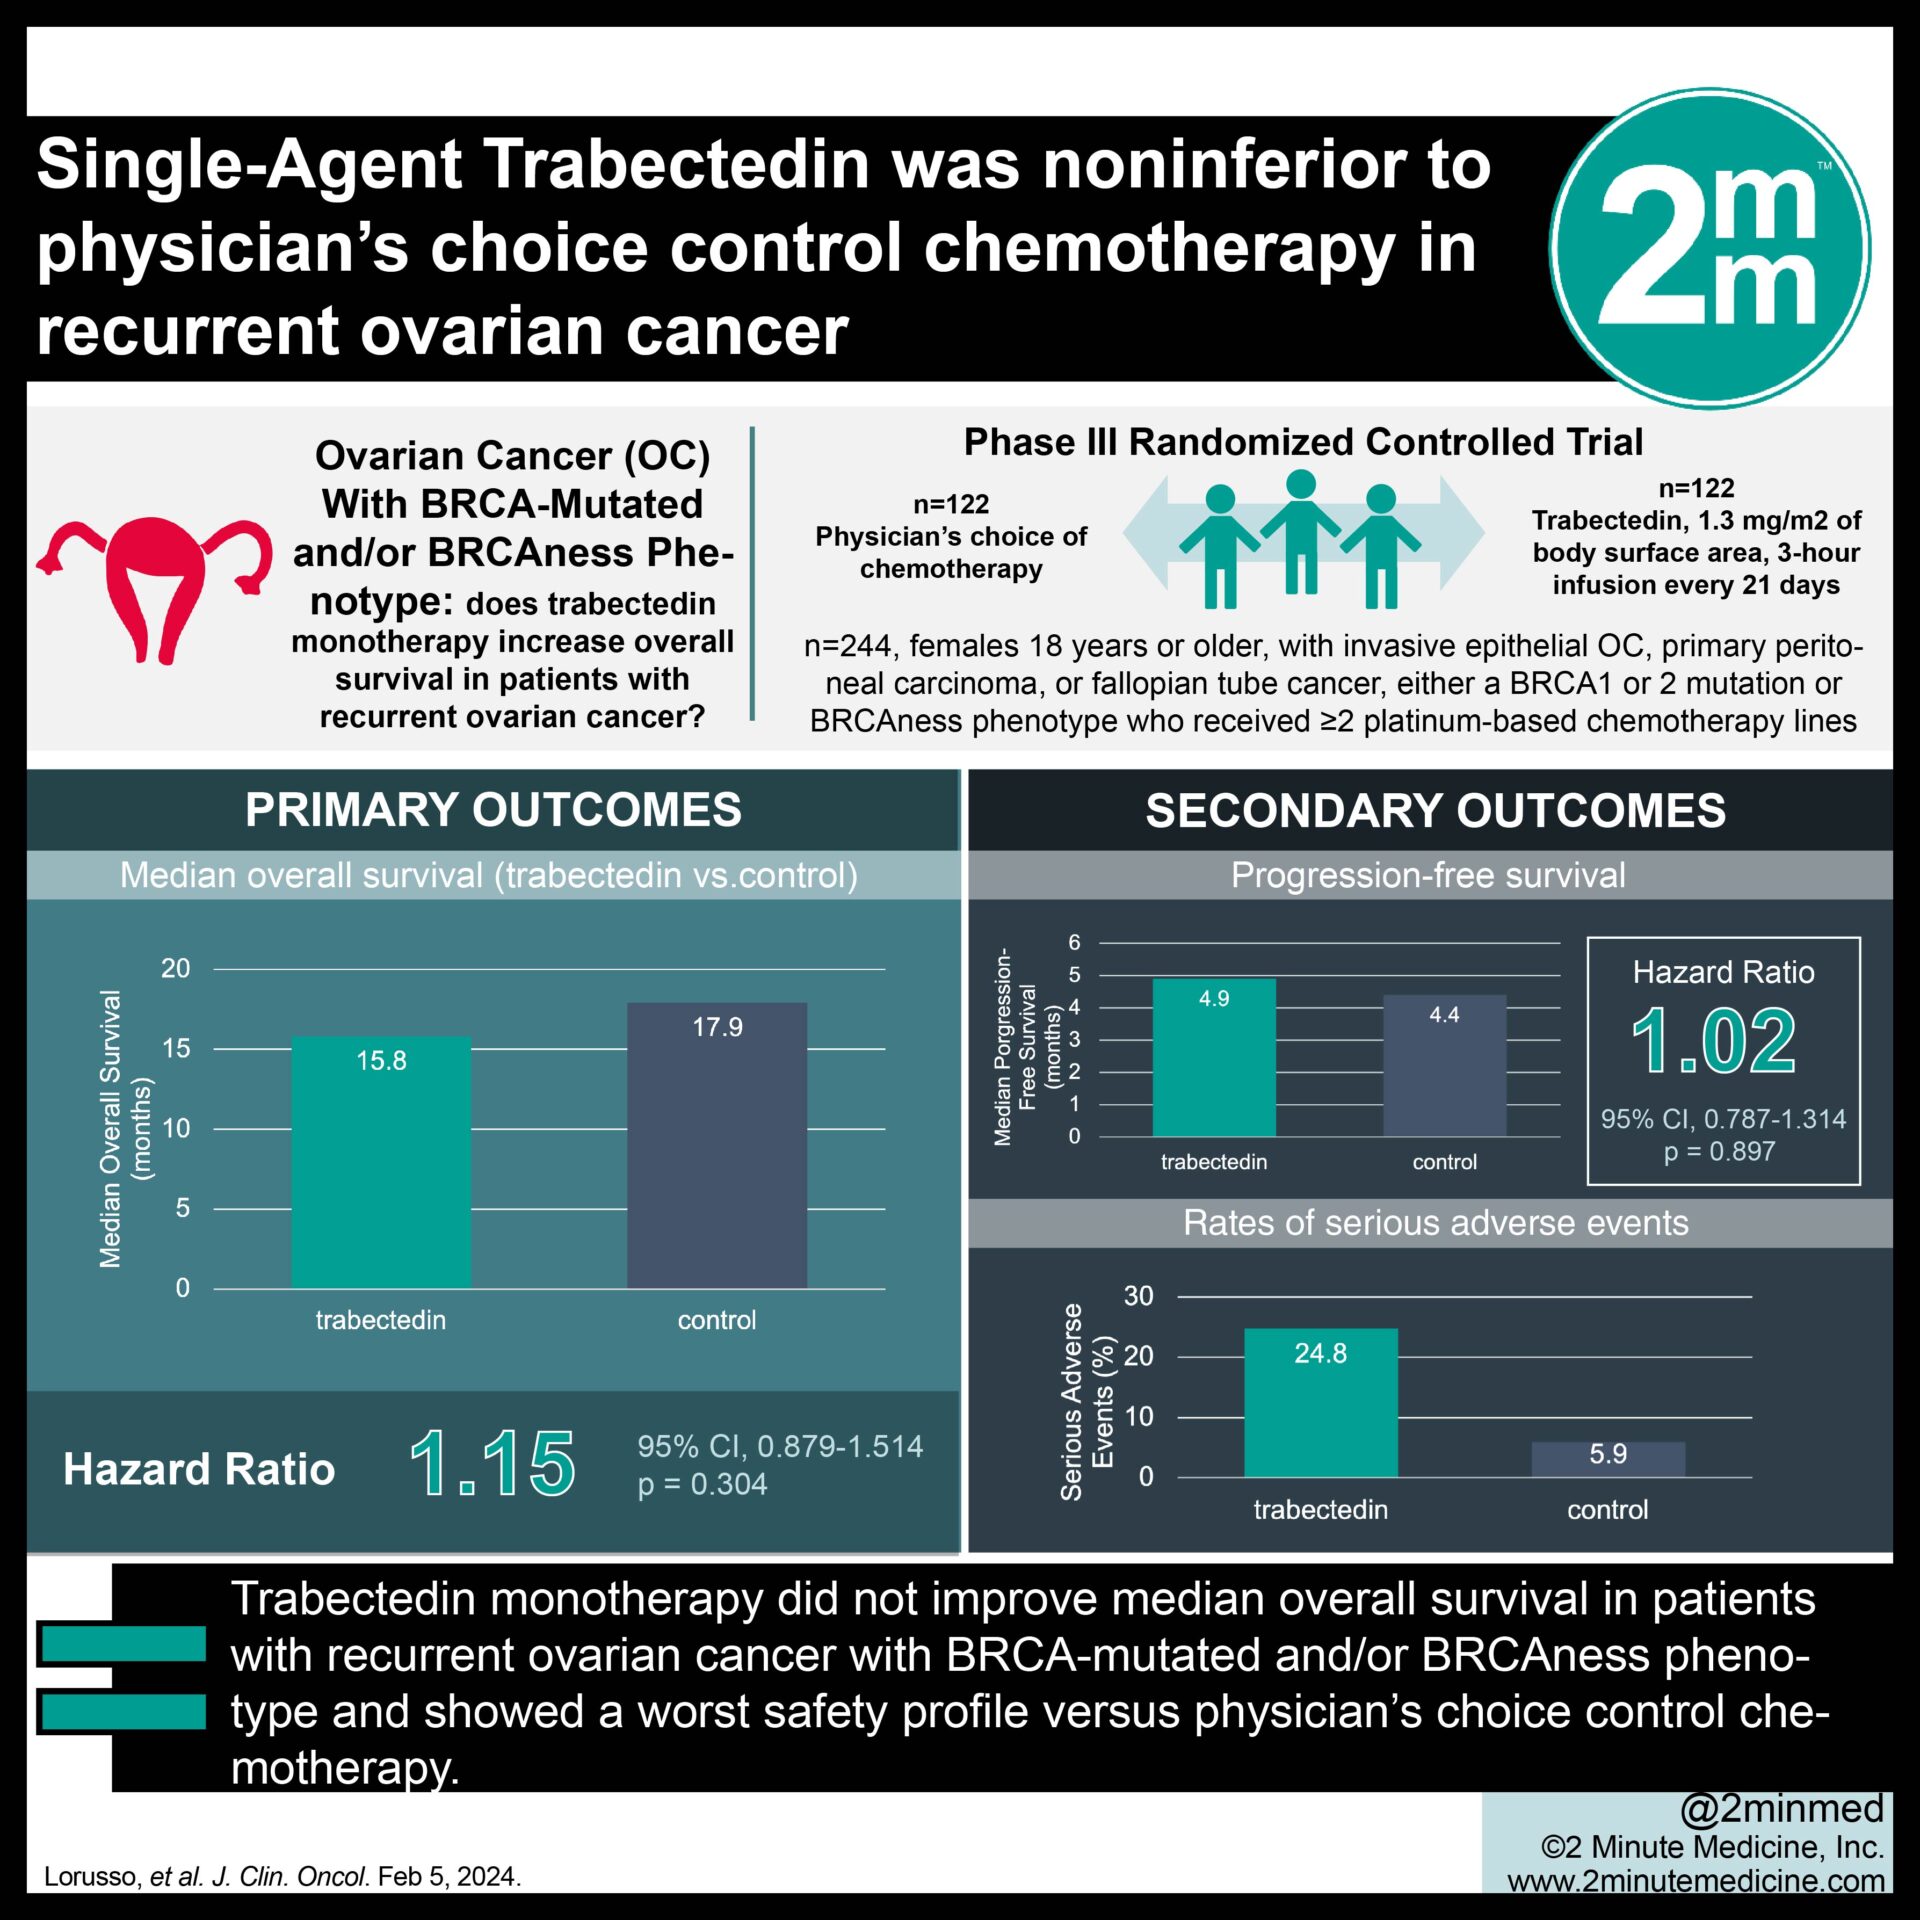 #VisualAbstract: Single-Agent Trabectedin was noninferior to physicianAND#8217;s choice control chemotherapy in recurrent ovarian cancer